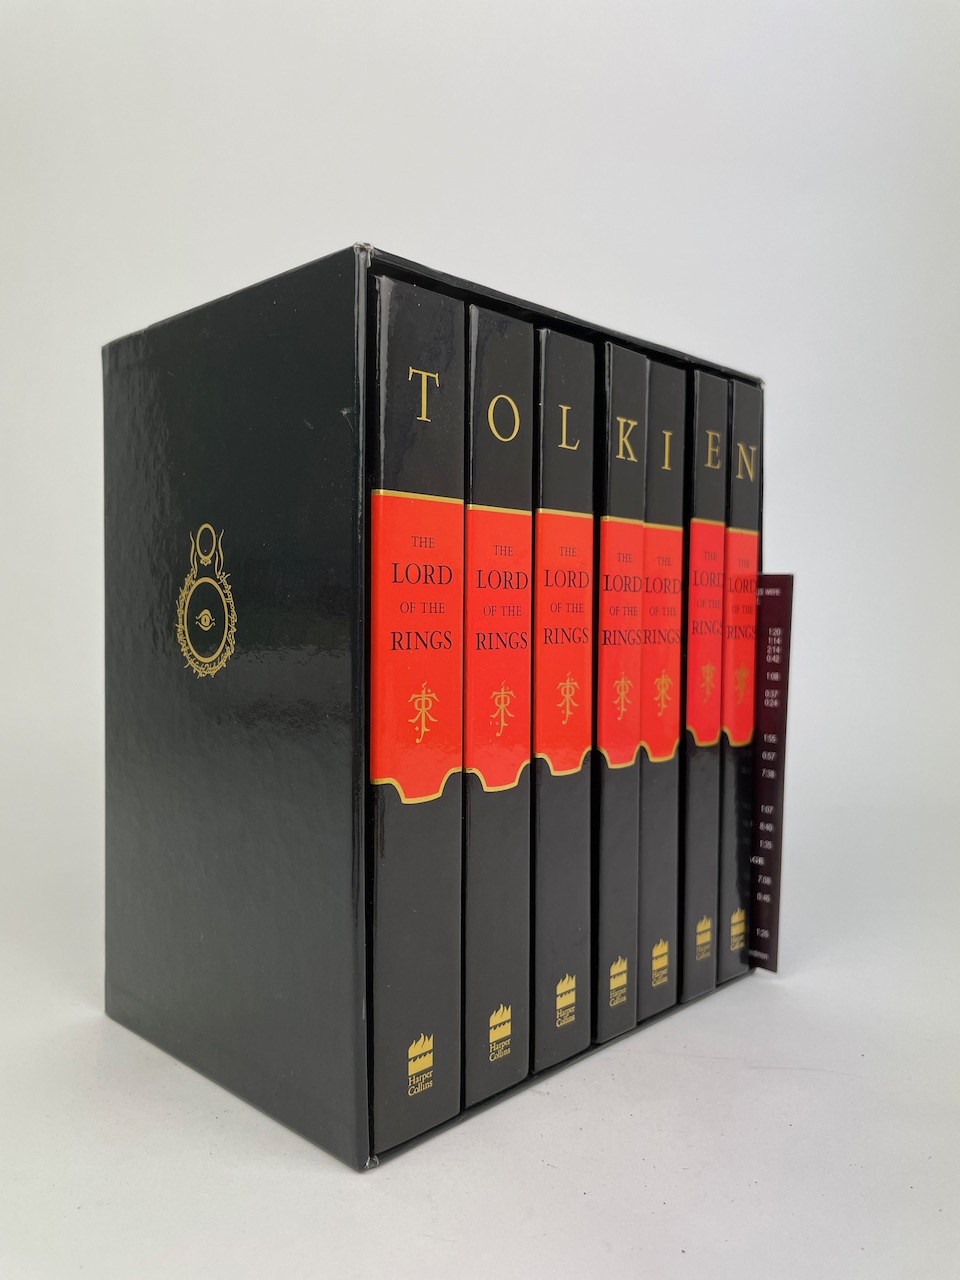 The Lord of the Rings 7 Volume Millenium Edition with CD 2